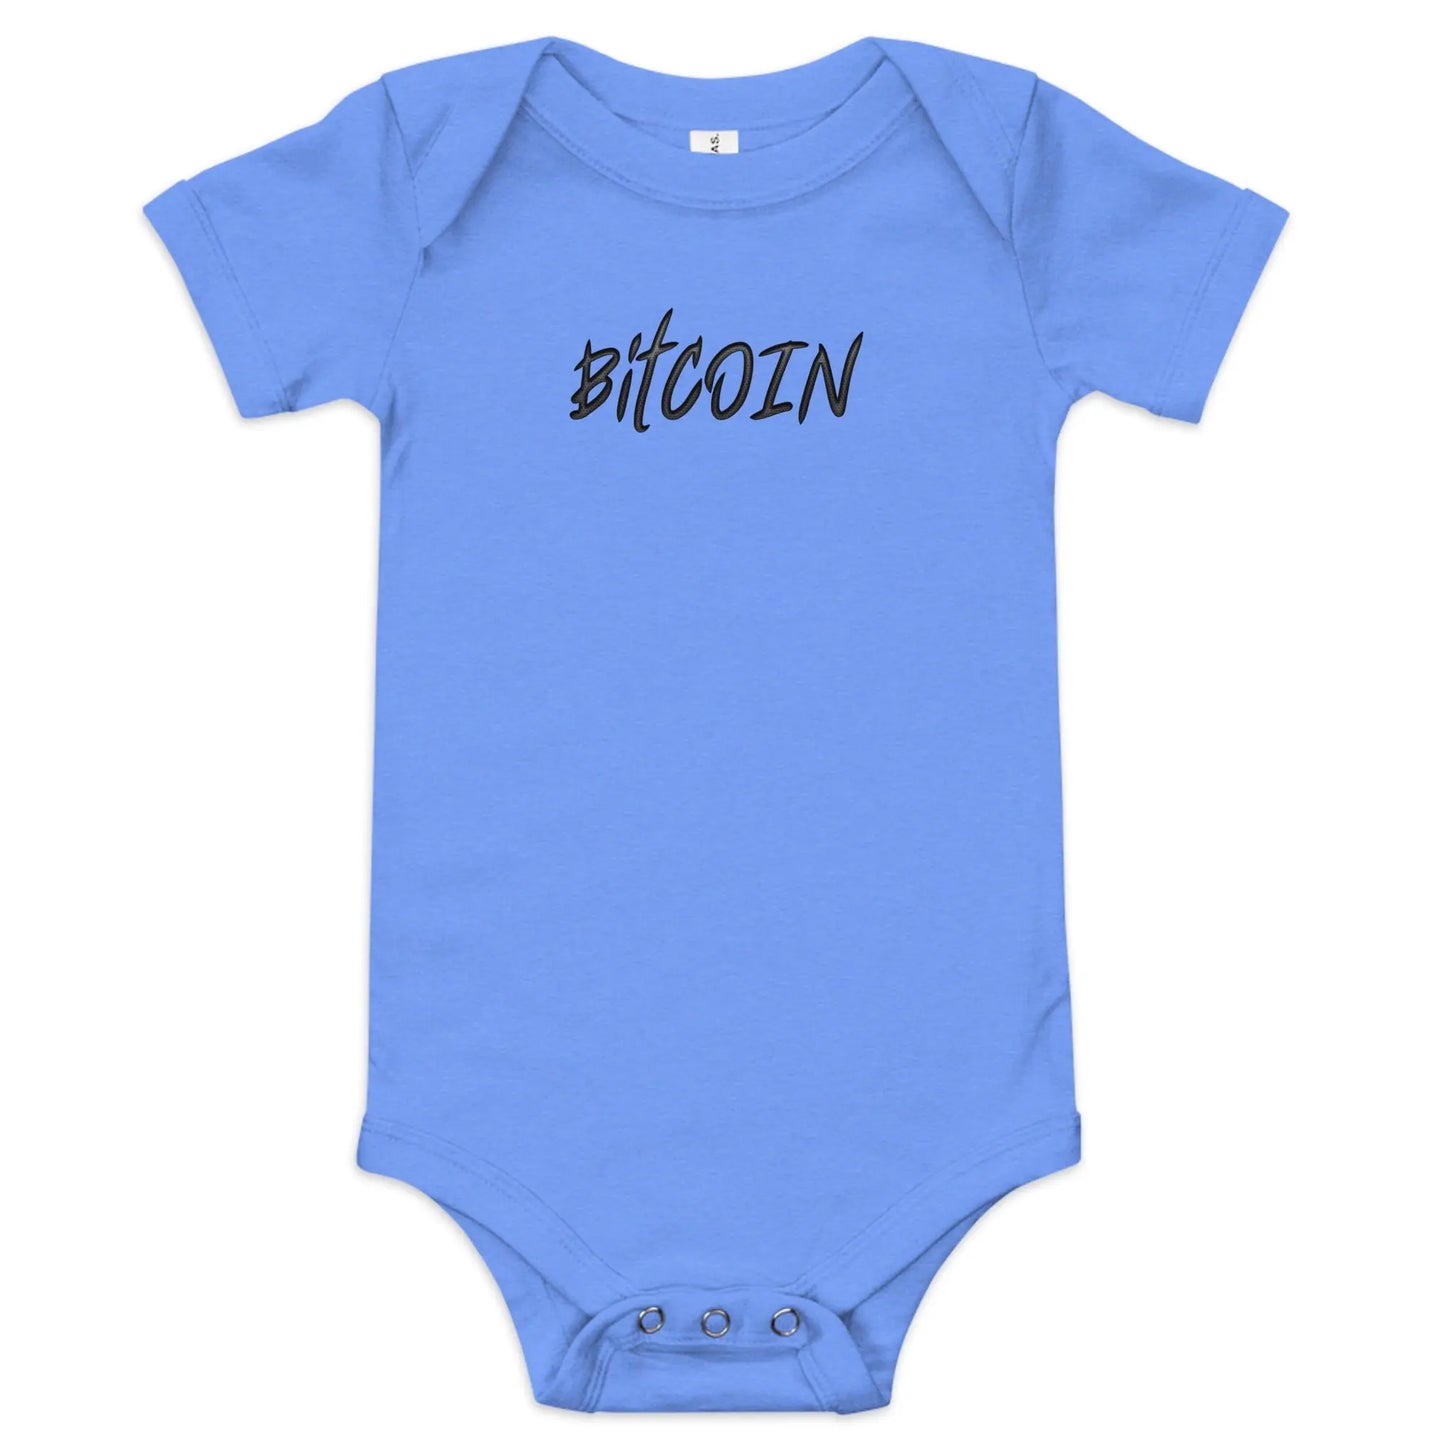 Fearless Bitcoin - Baby Bitcoin Body Suit Blue Color